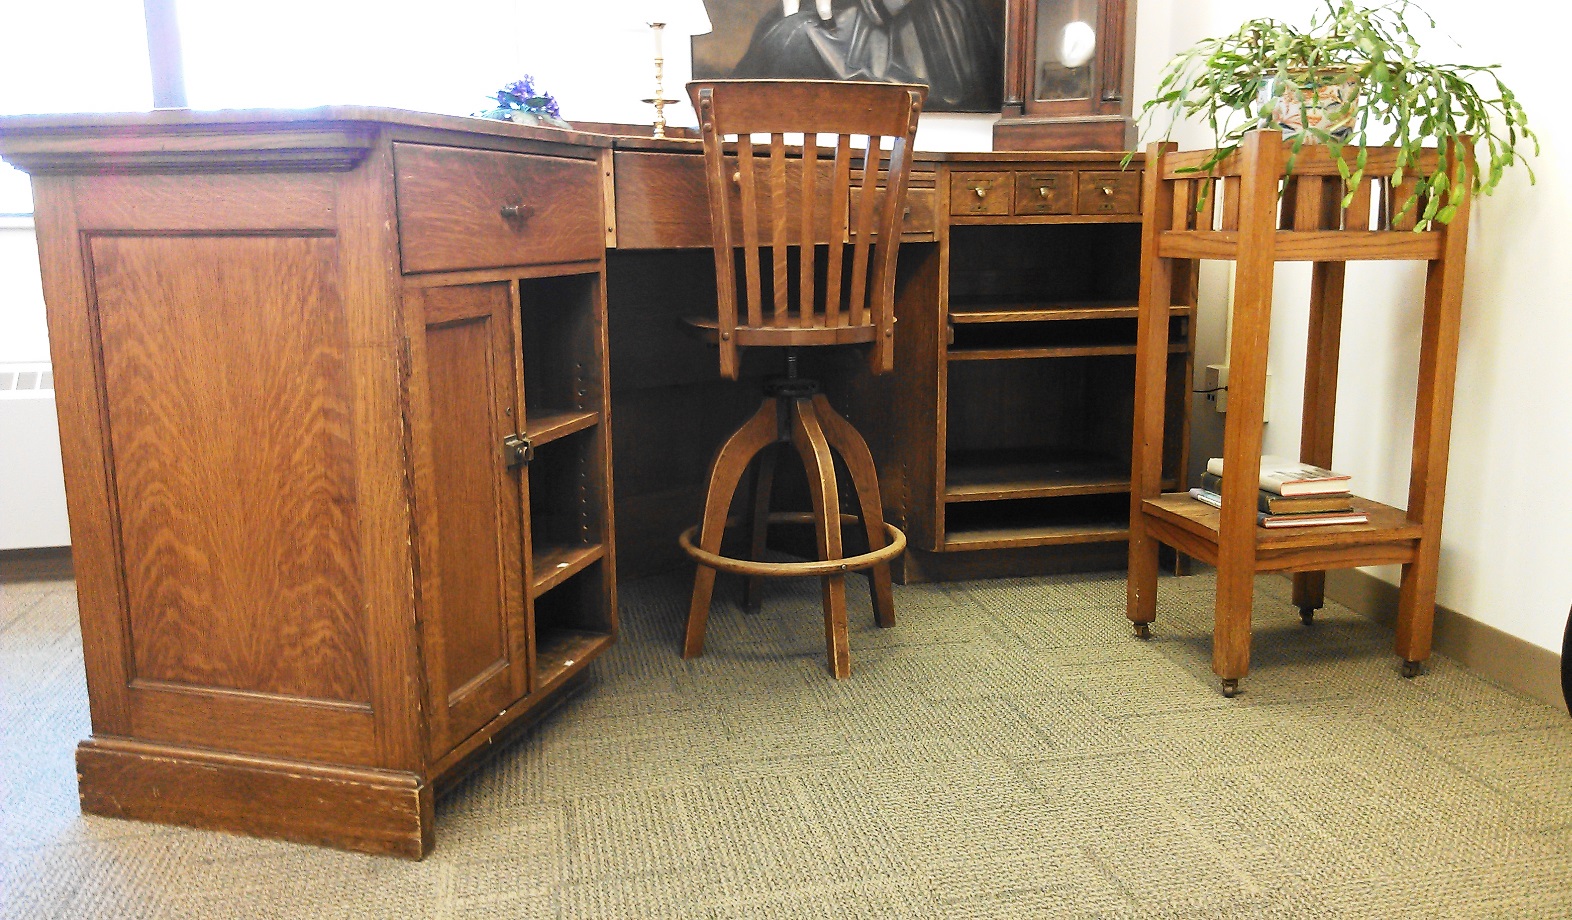 Carnegie desk, chair, plant stand